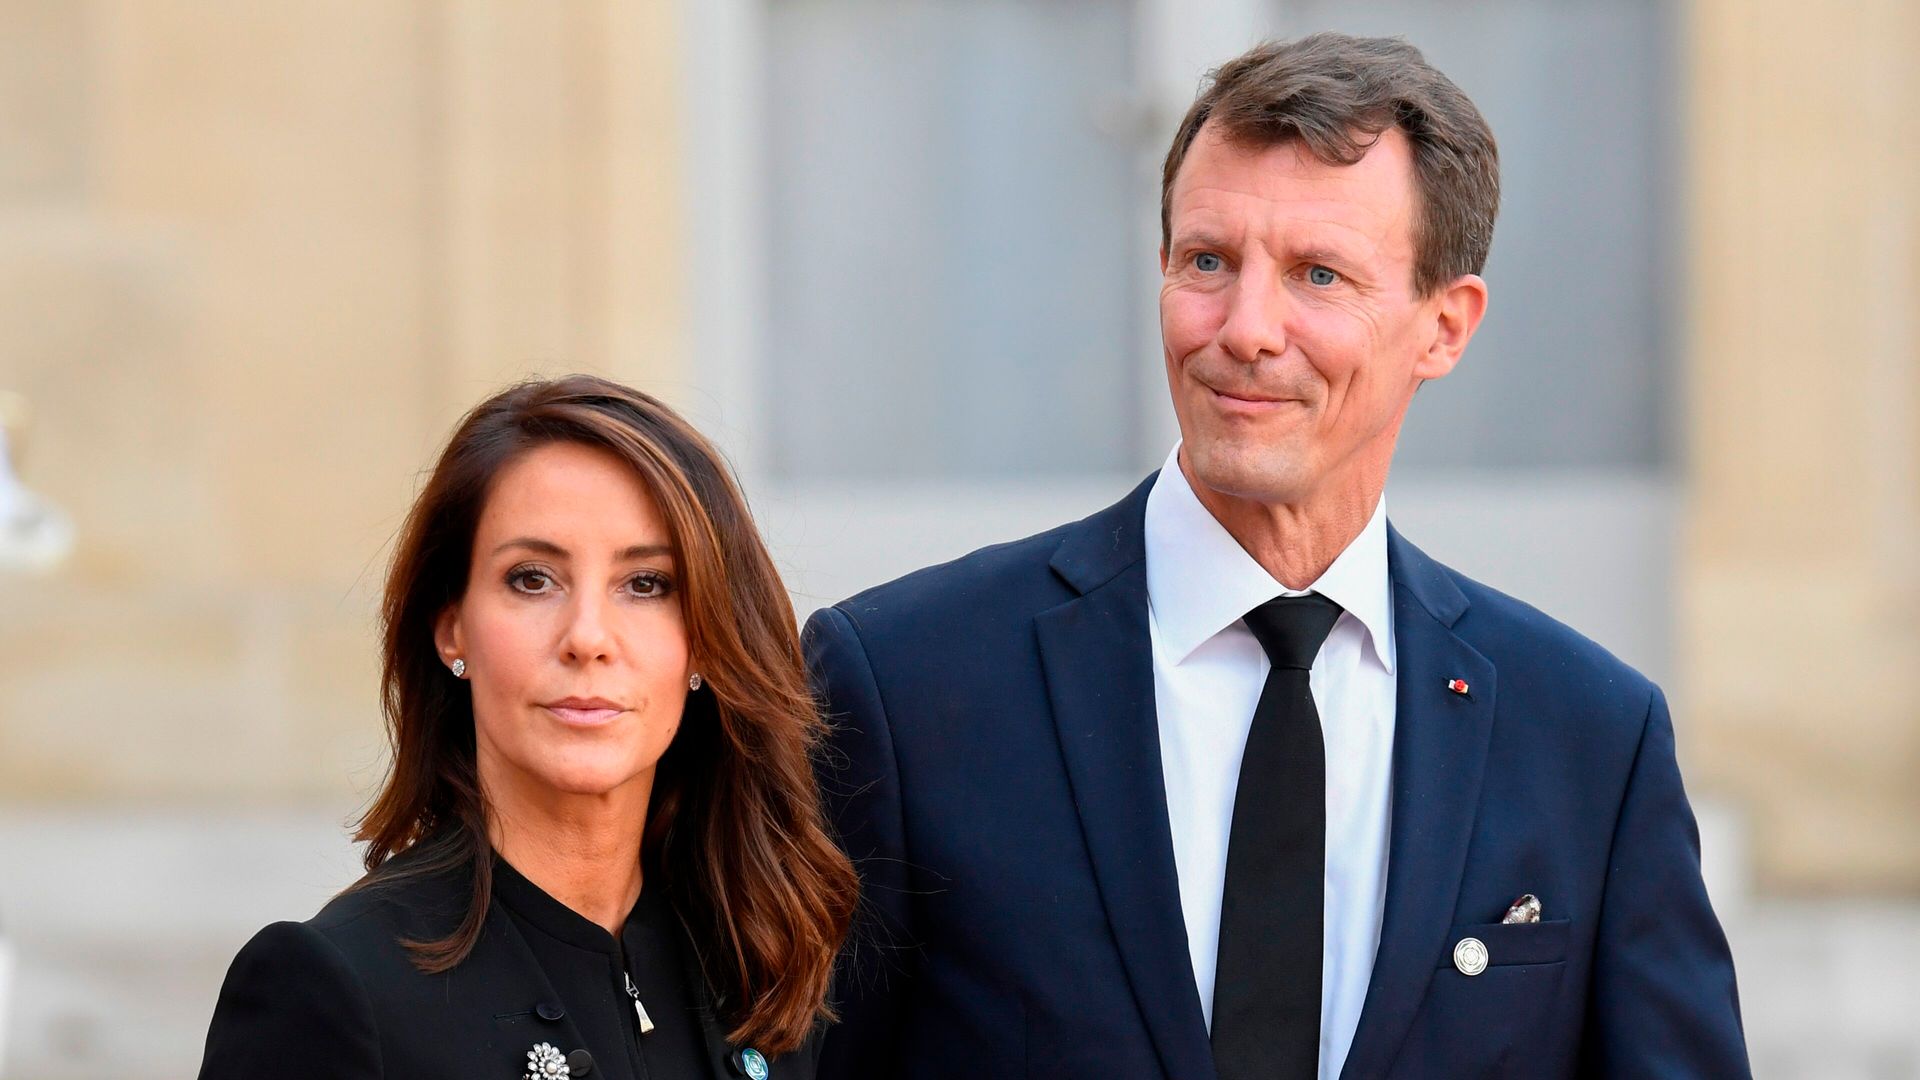 Prince Joachim and Princess Marie will move to the US this summer